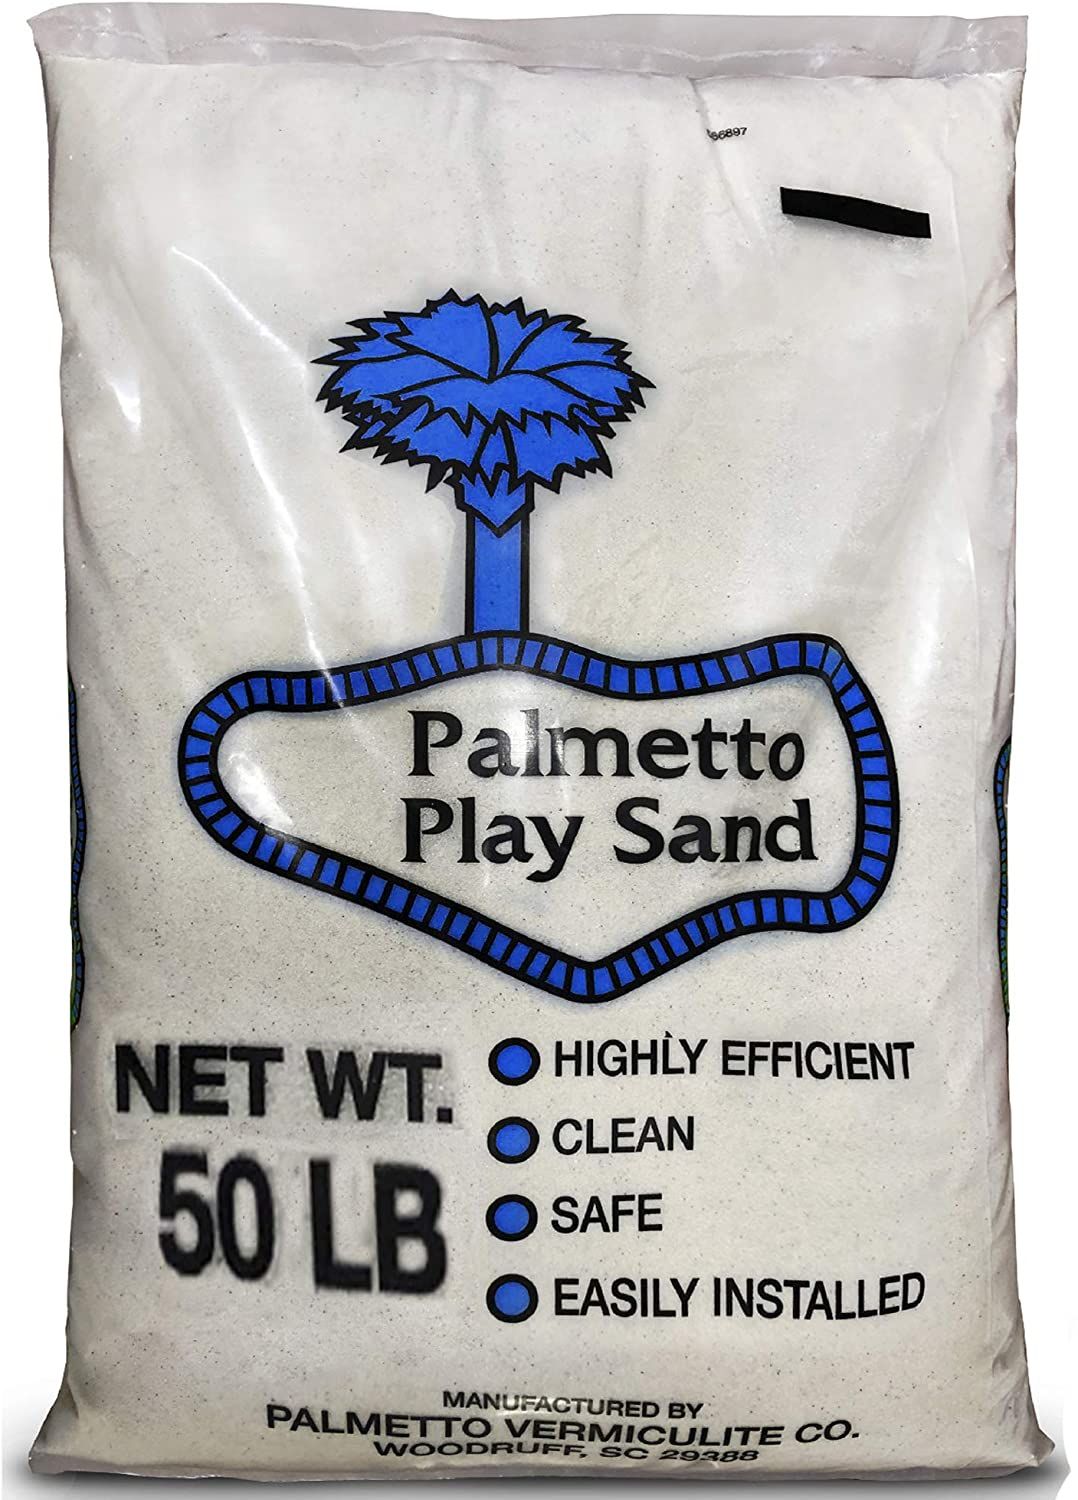 Palmetto Play Sand - $$title$$